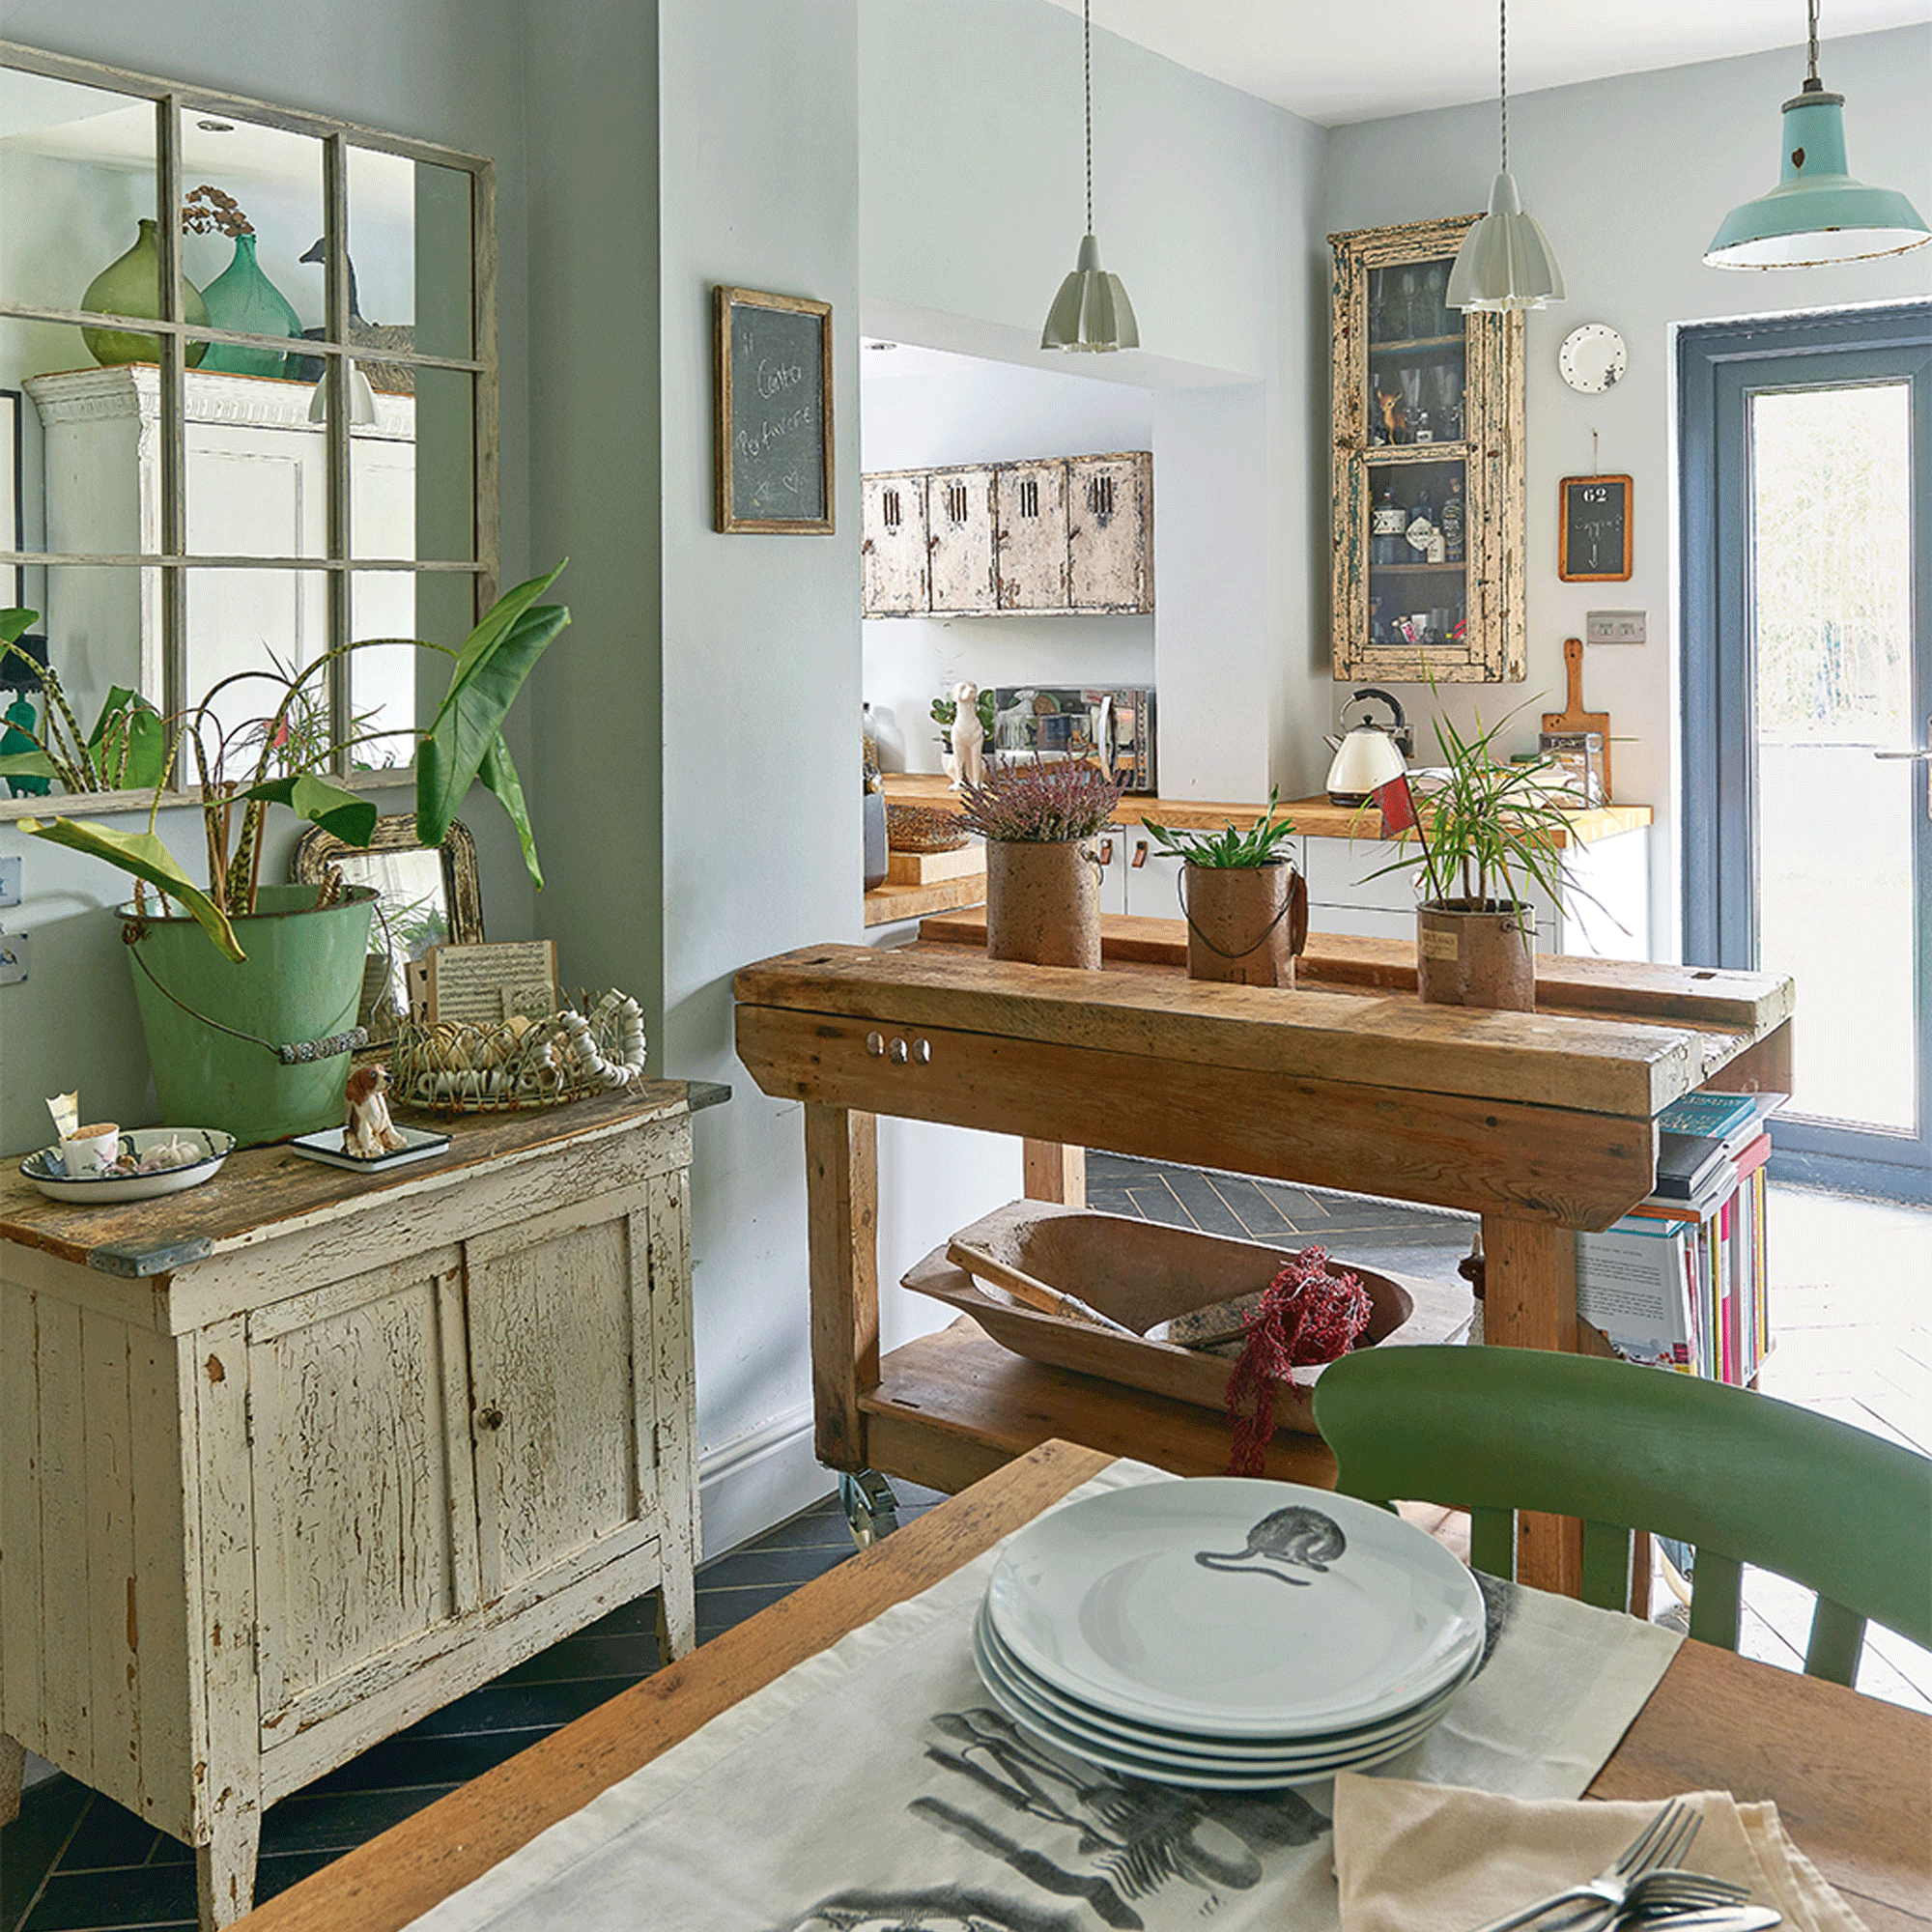 Green kitchen with wooden island